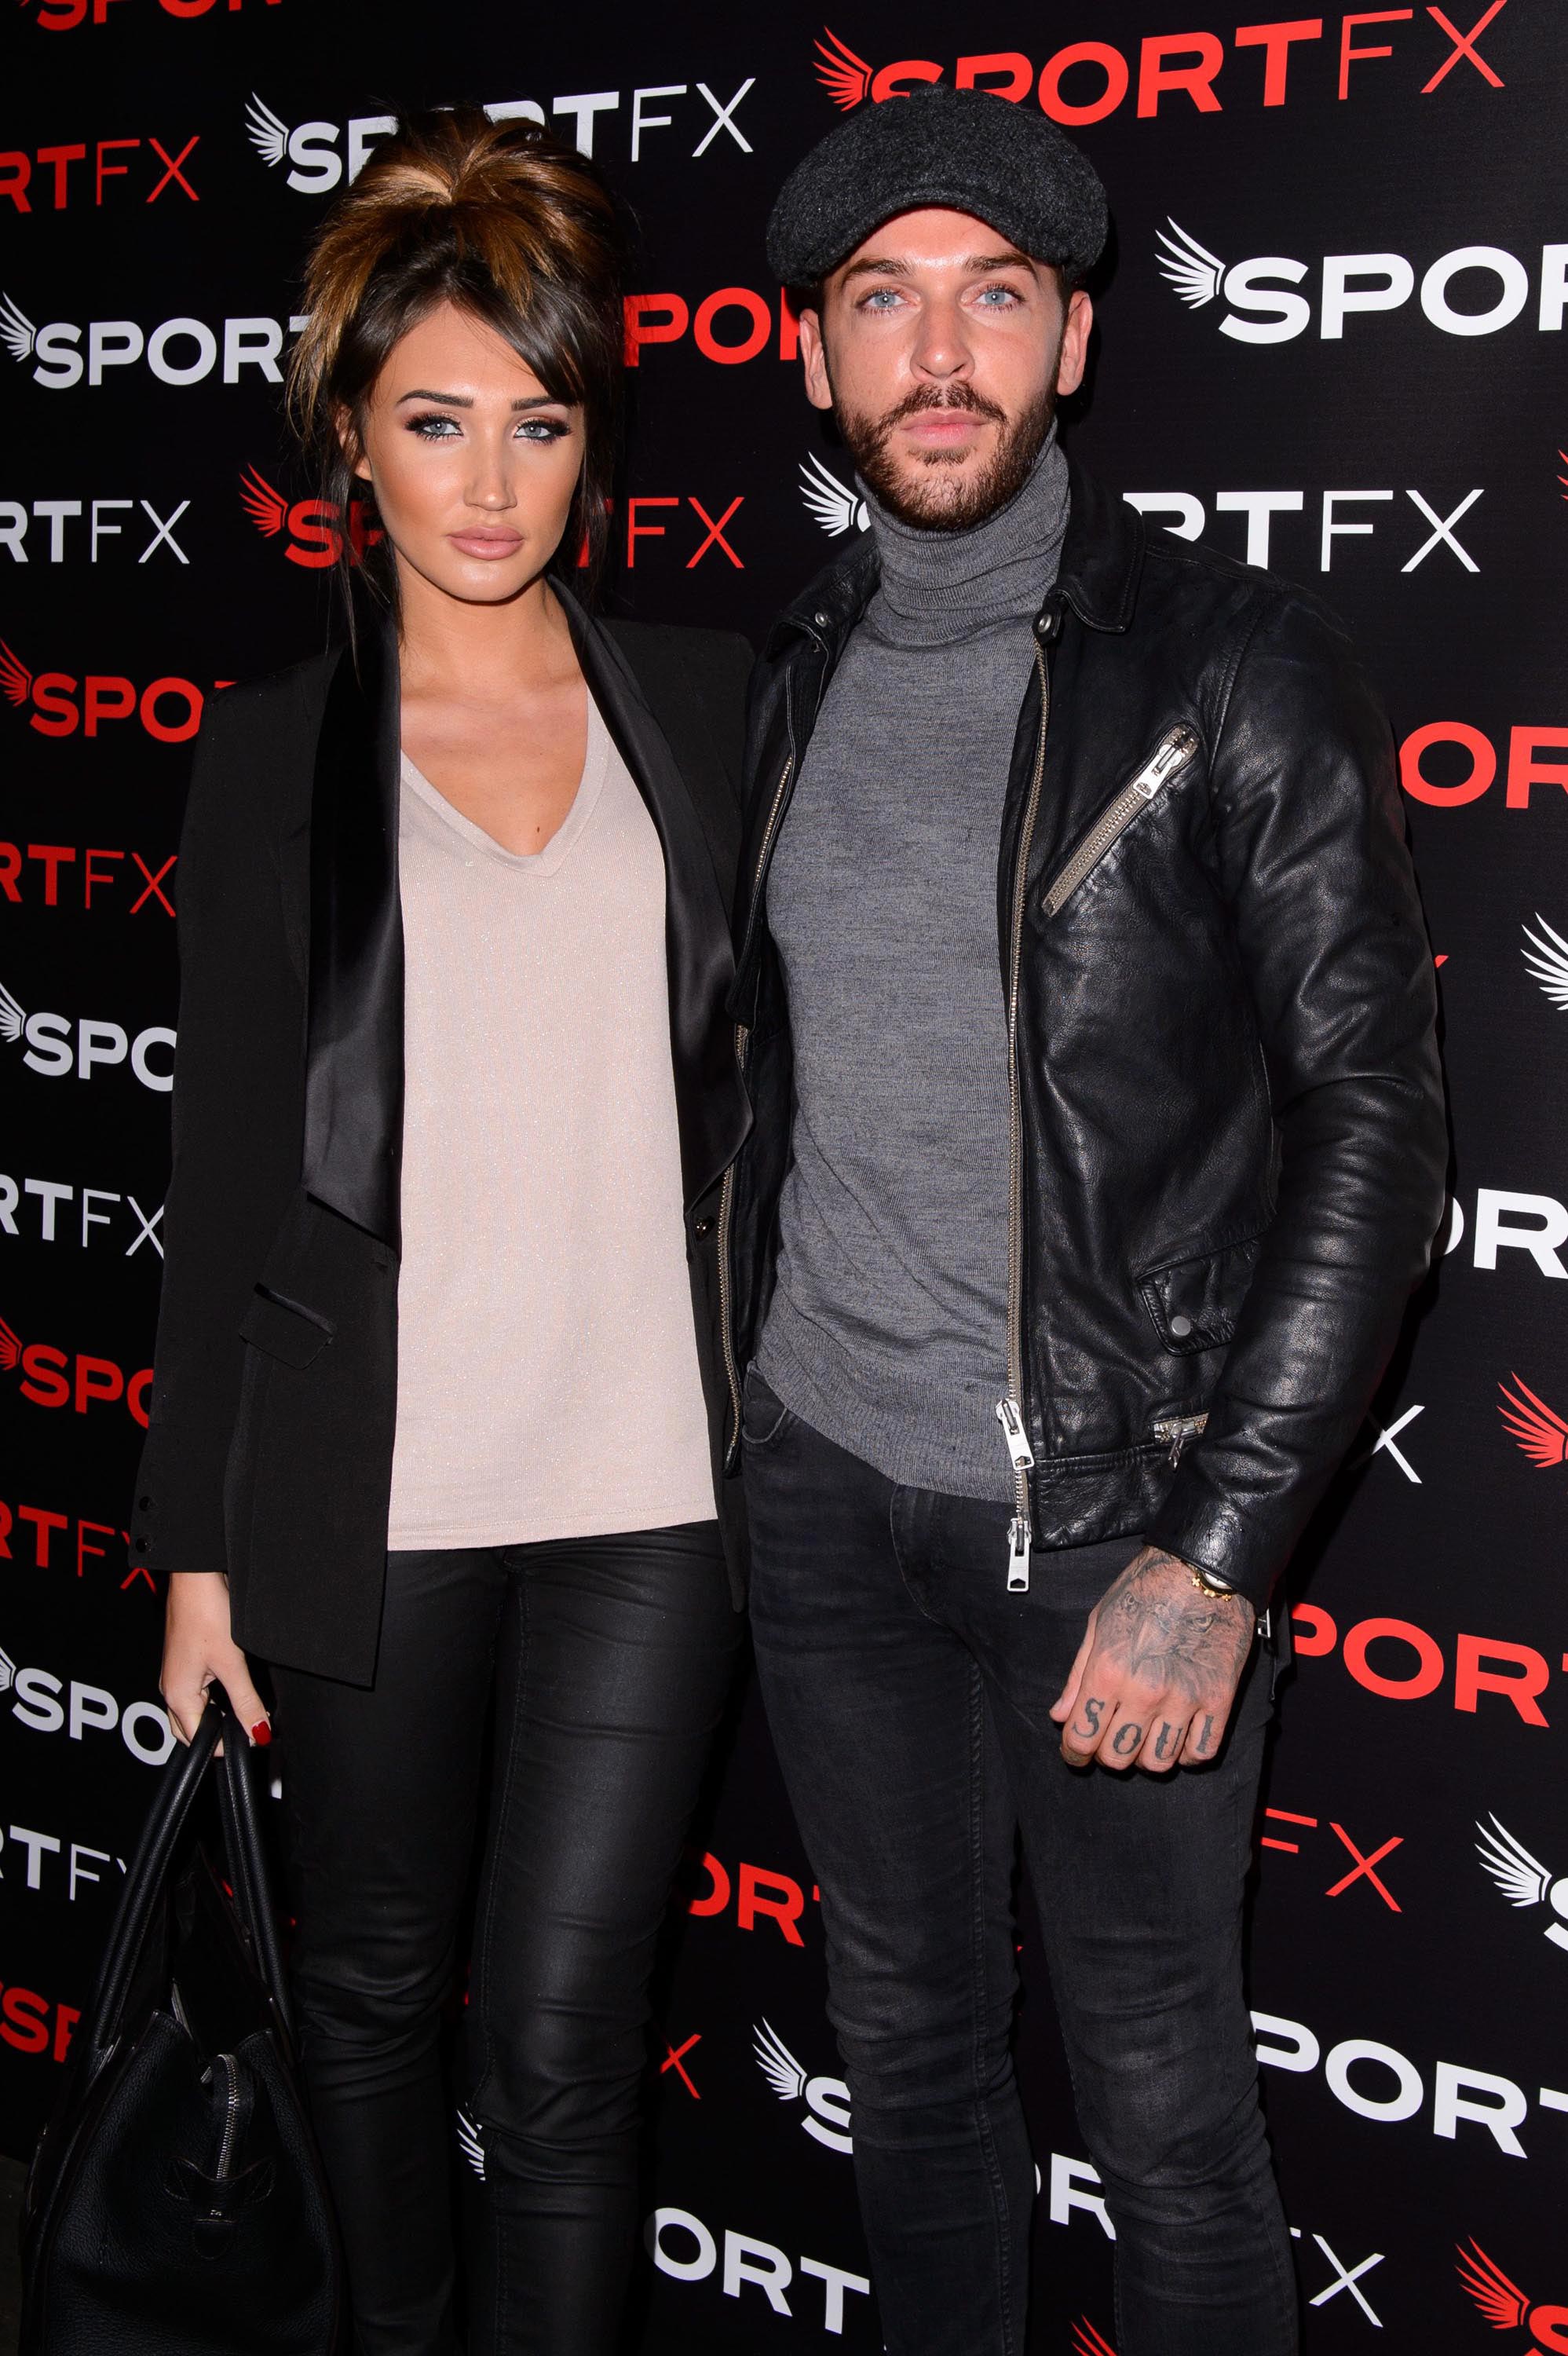 Megan McKenna attends SPORTFX cosmetic and sports launch party